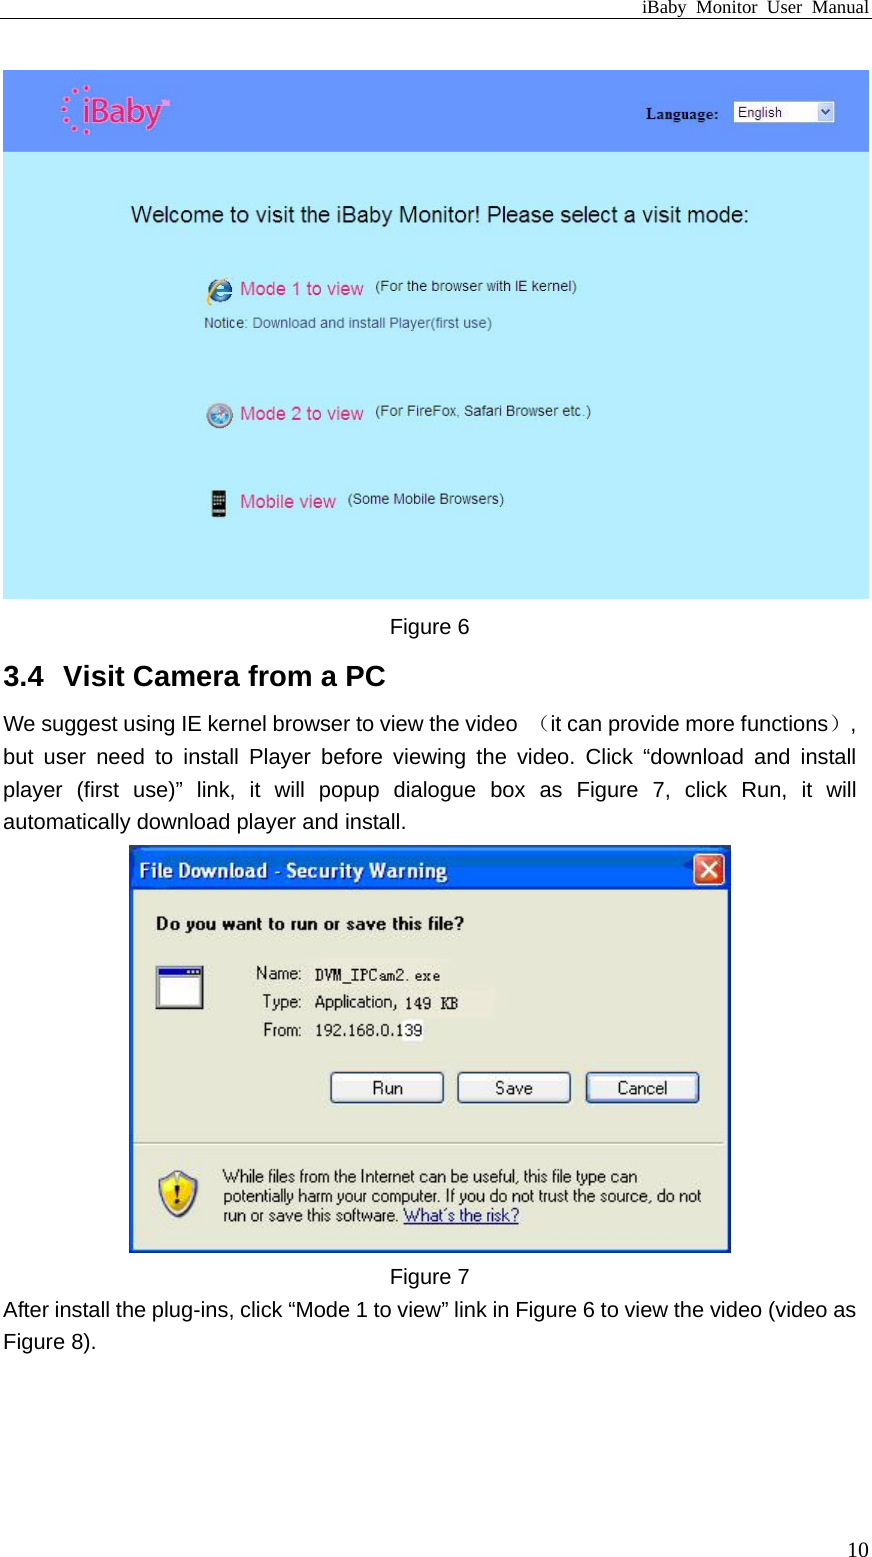 iBaby Monitor User Manual  Figure 6 3.4  Visit Camera from a PC We suggest using IE kernel browser to view the video  （it can provide more functions）, but user need to install Player before viewing the video. Click “download and install player (first use)” link, it will popup dialogue box as Figure 7, click Run, it will automatically download player and install.  Figure 7 After install the plug-ins, click “Mode 1 to view” link in Figure 6 to view the video (video as Figure 8).  10